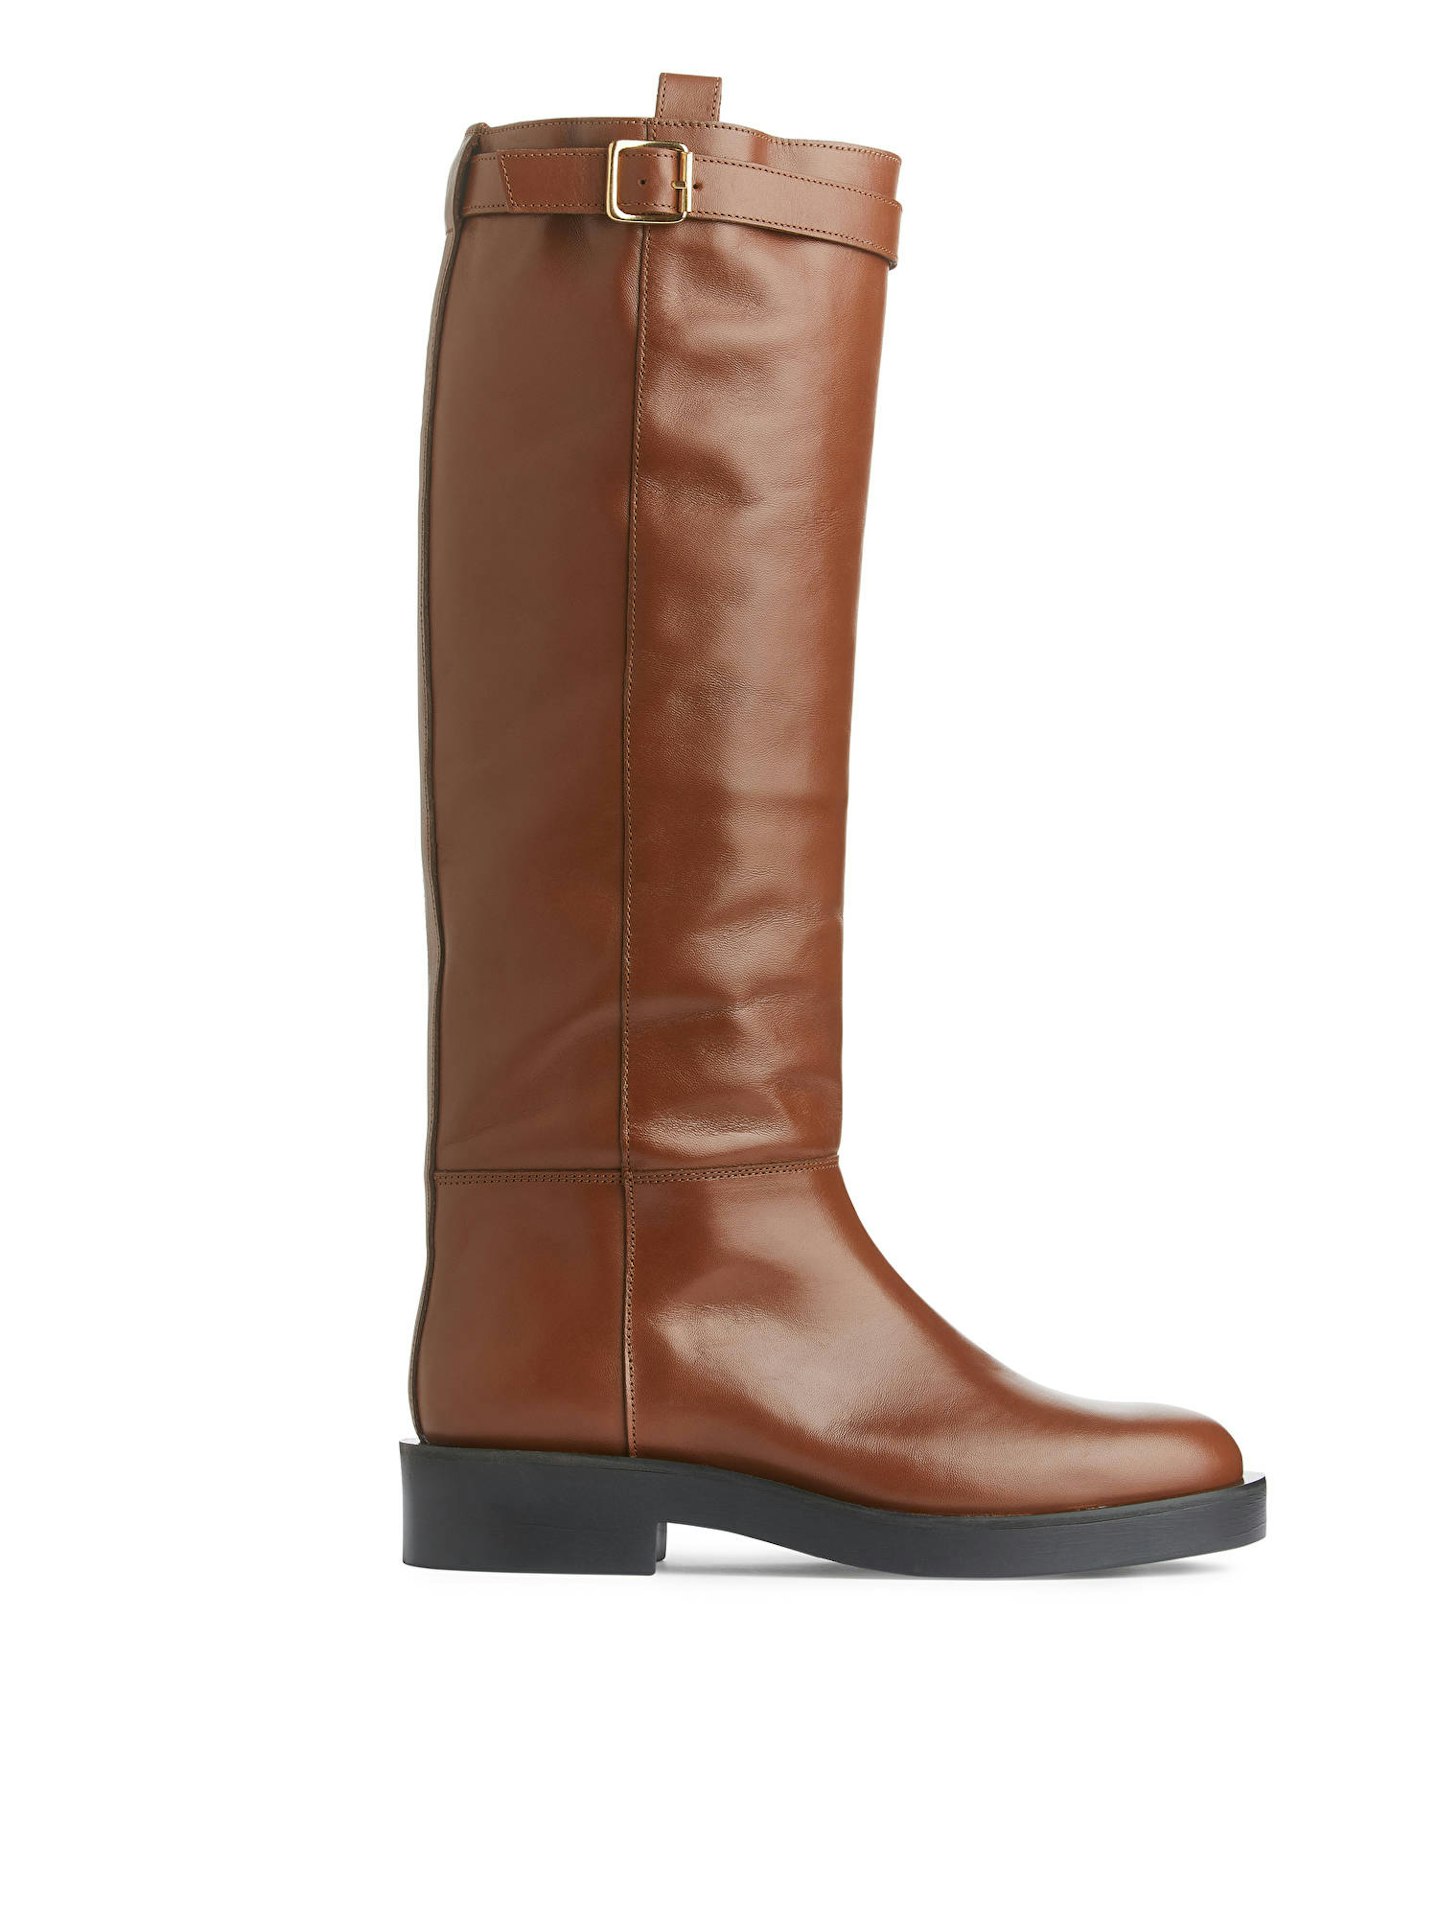 Arket, Leather Riding Boots